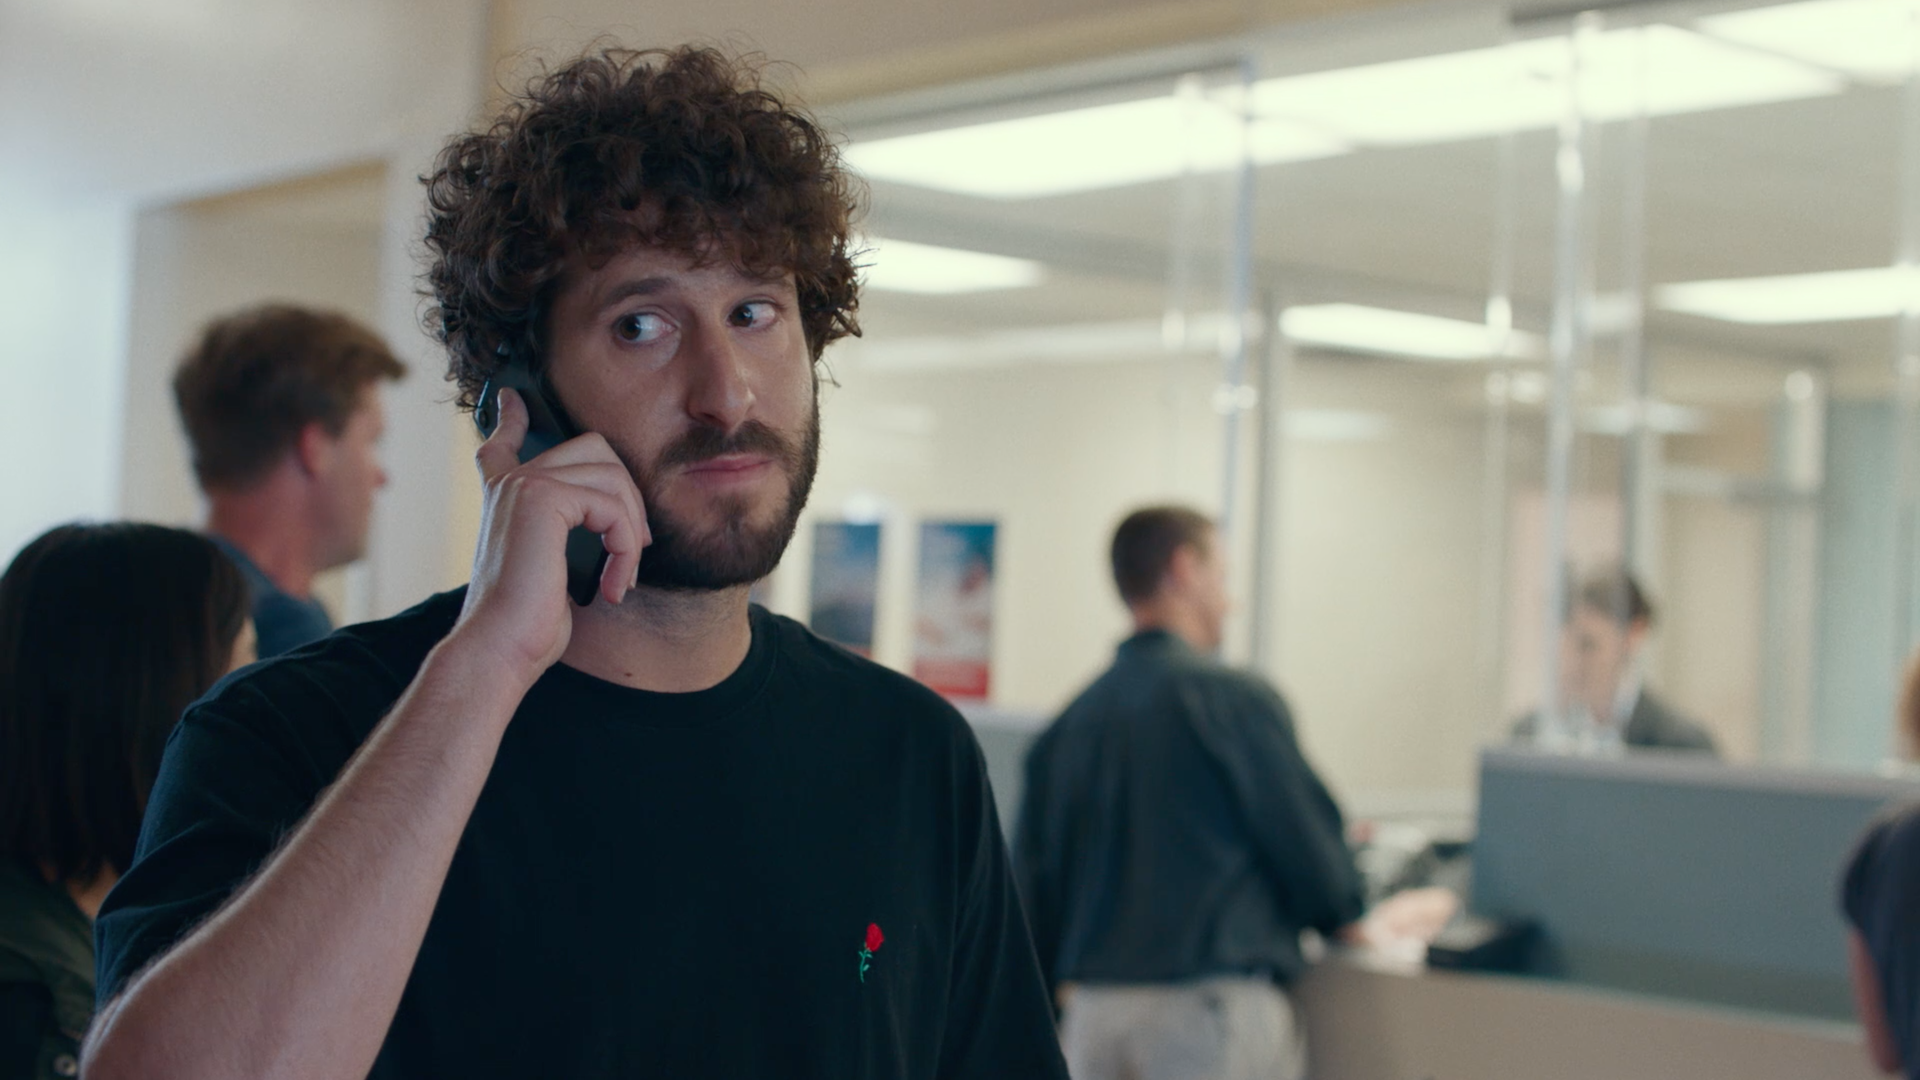 Lil dick. Lil Dicky. David less. Lil Dicky without Beard. Lil Dicky dating- what is the History of Lil Dicky's relationships?.